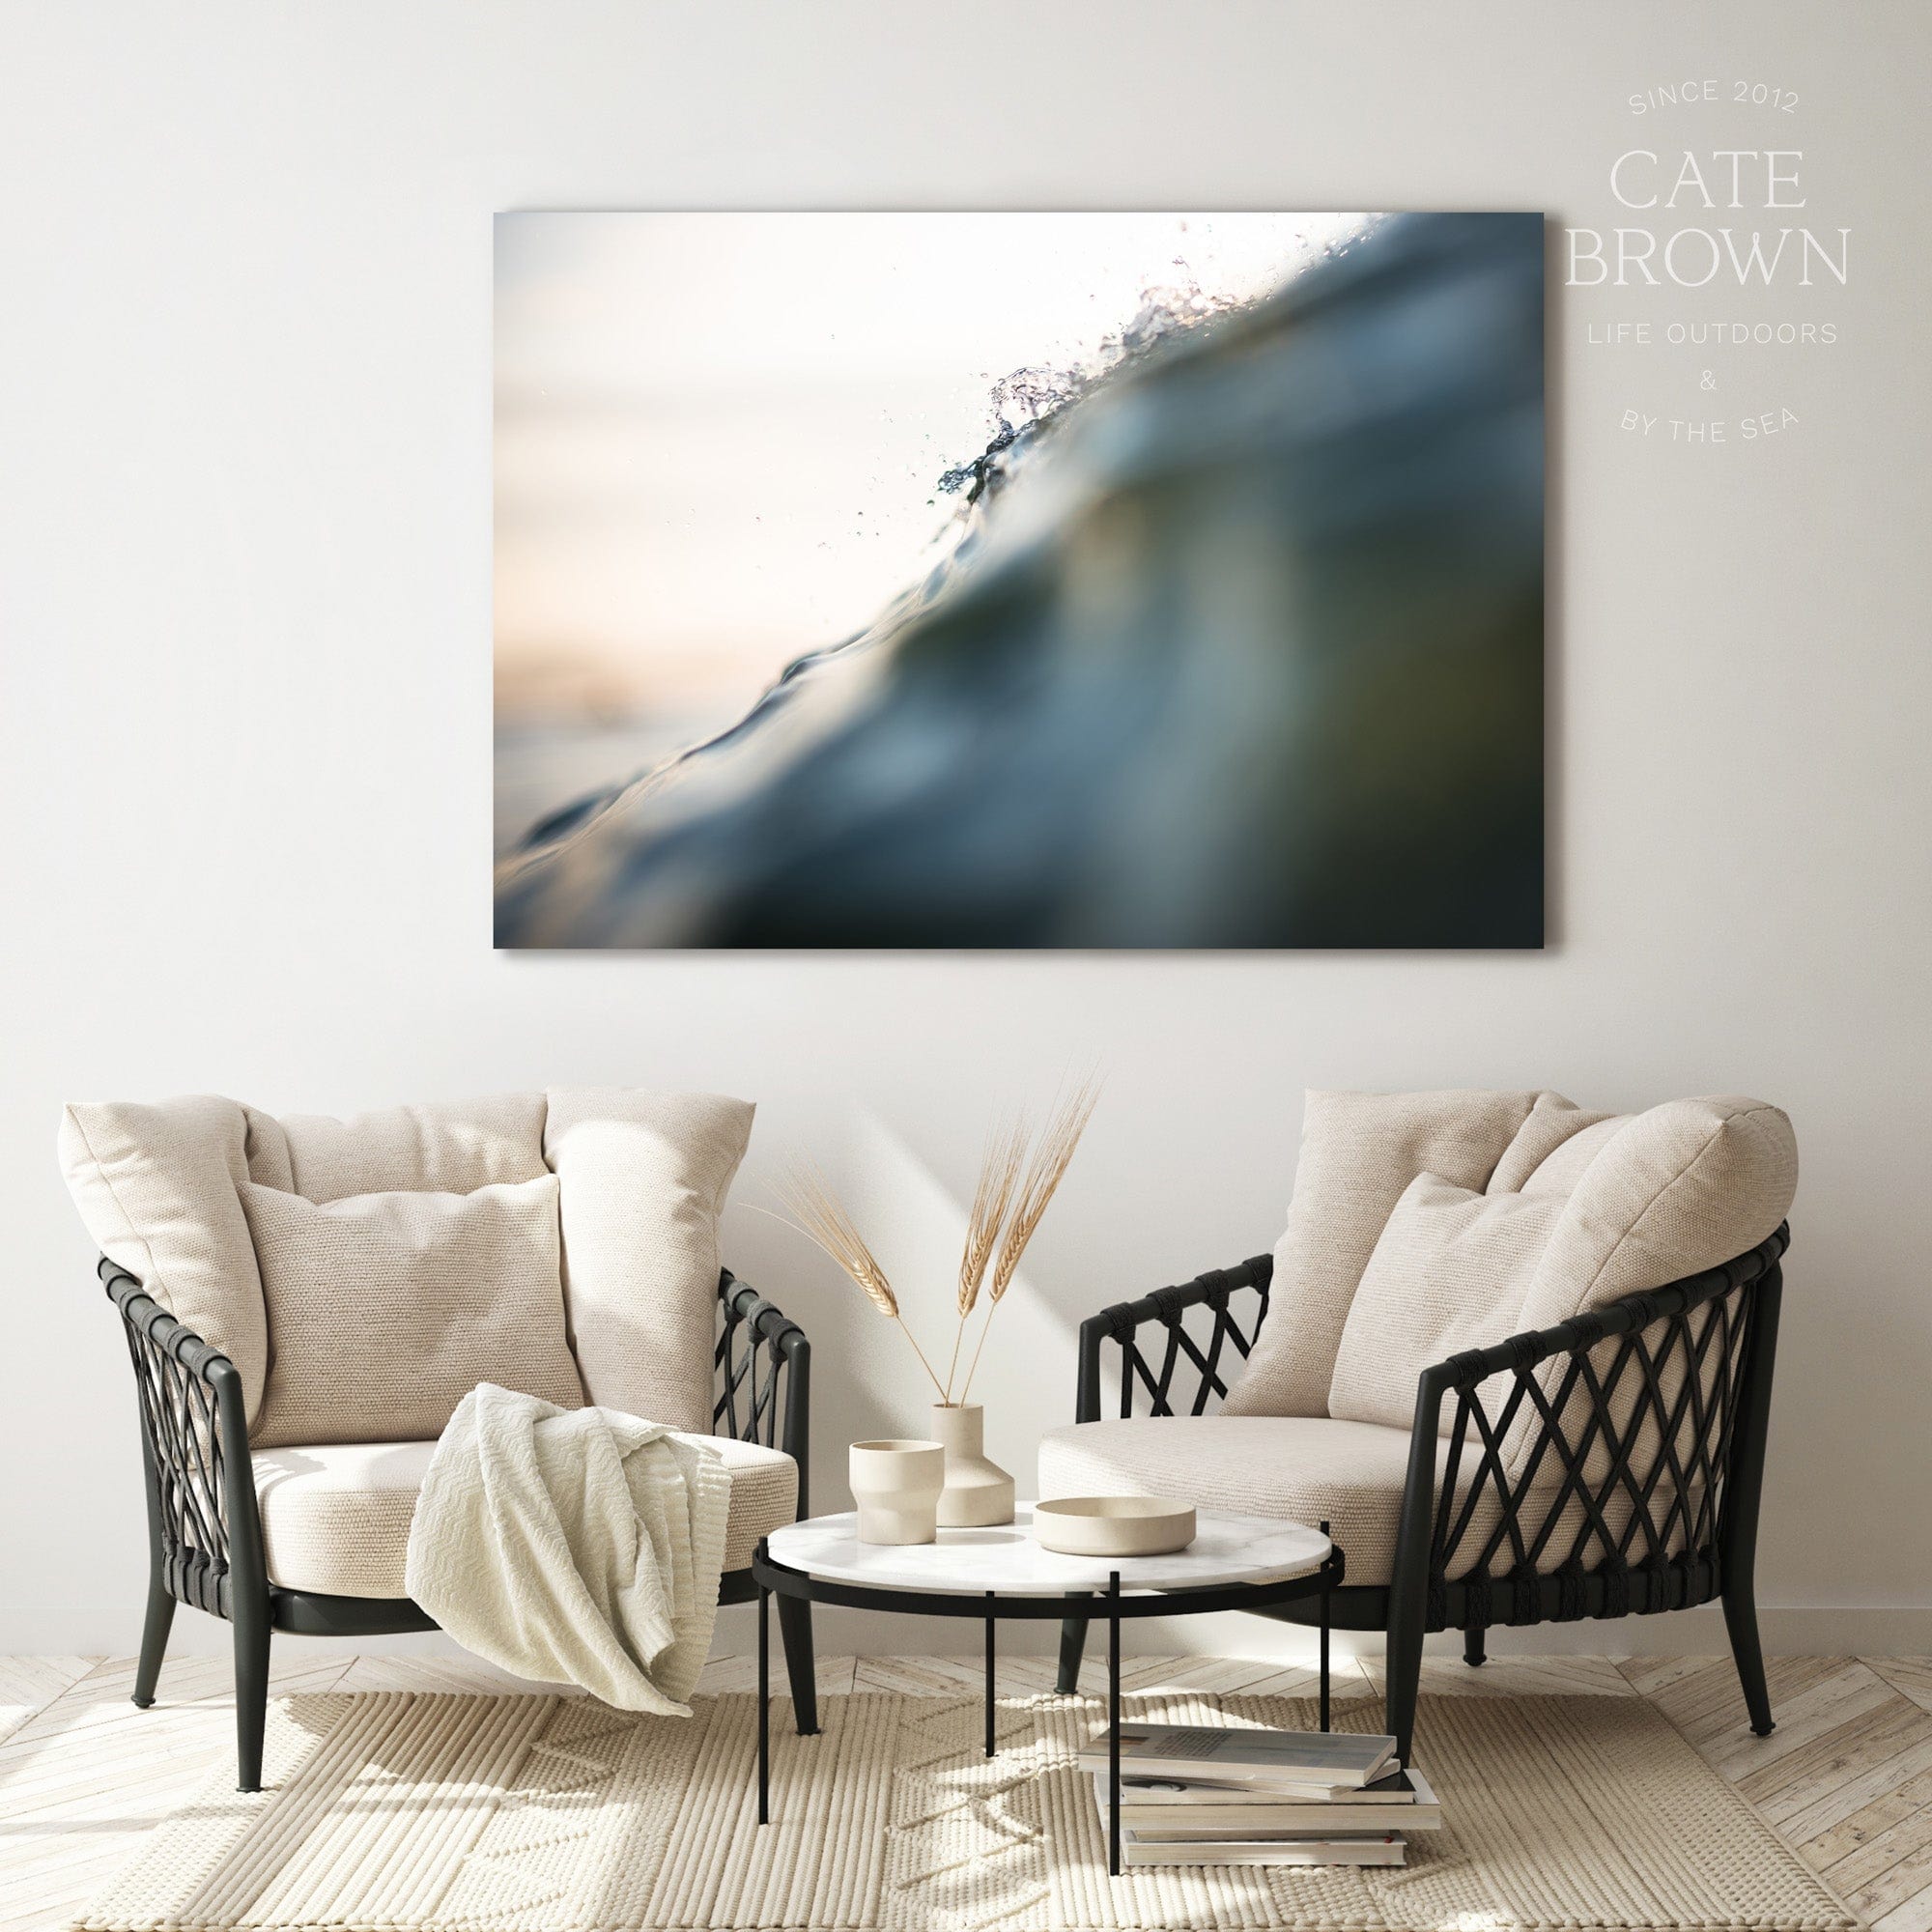 Cate Brown Photo Canvas / 16"x24" / None (Print Only) Protect & Preserve  //  Ocean Photography Made to Order Ocean Fine Art